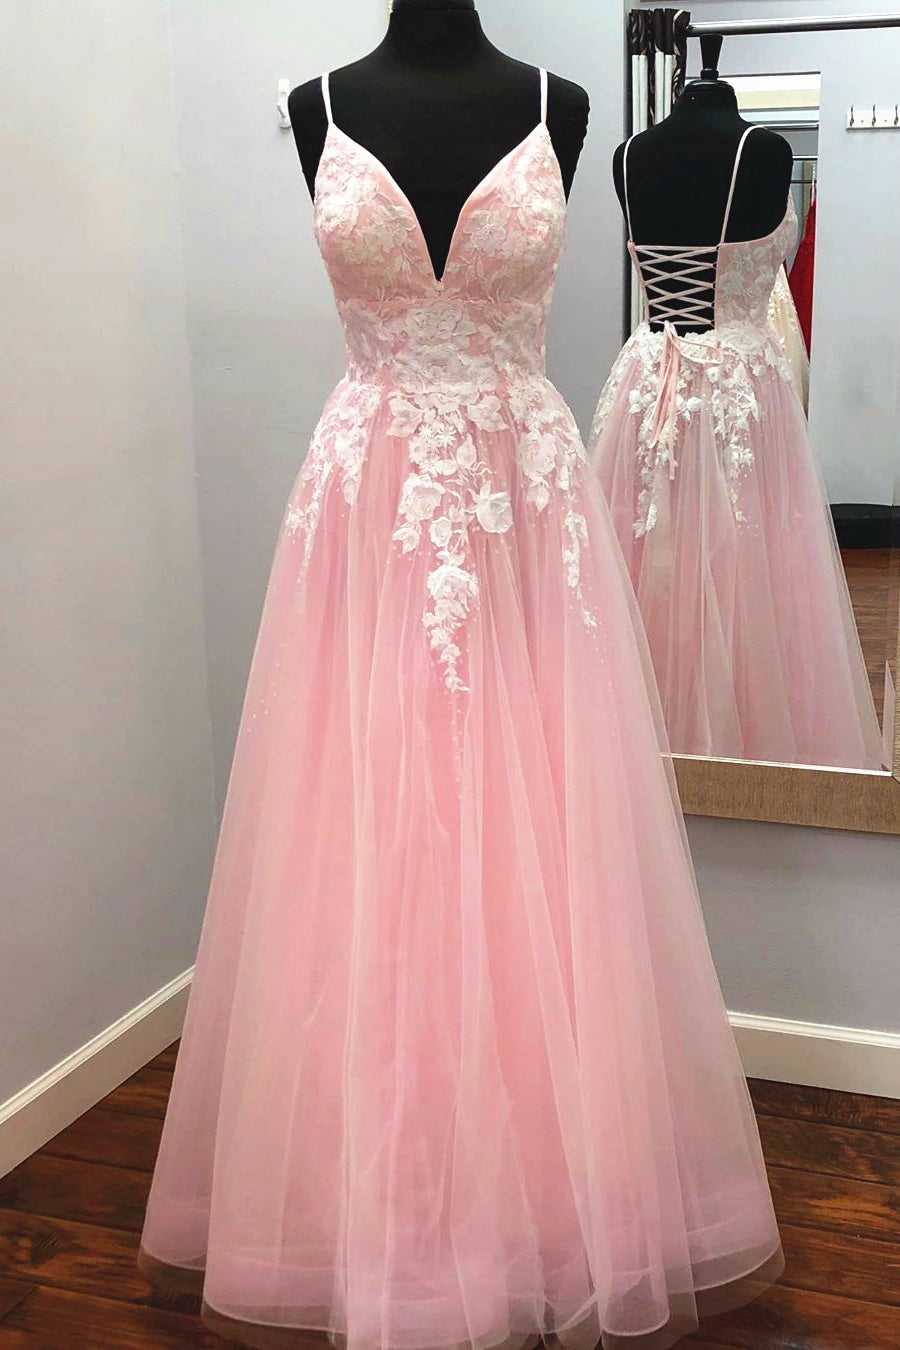 Pink Prom Dress Lace Up Back, Evening Dress, Formal Dress, Graduation School Party Gown, PC0499 - Promcoming